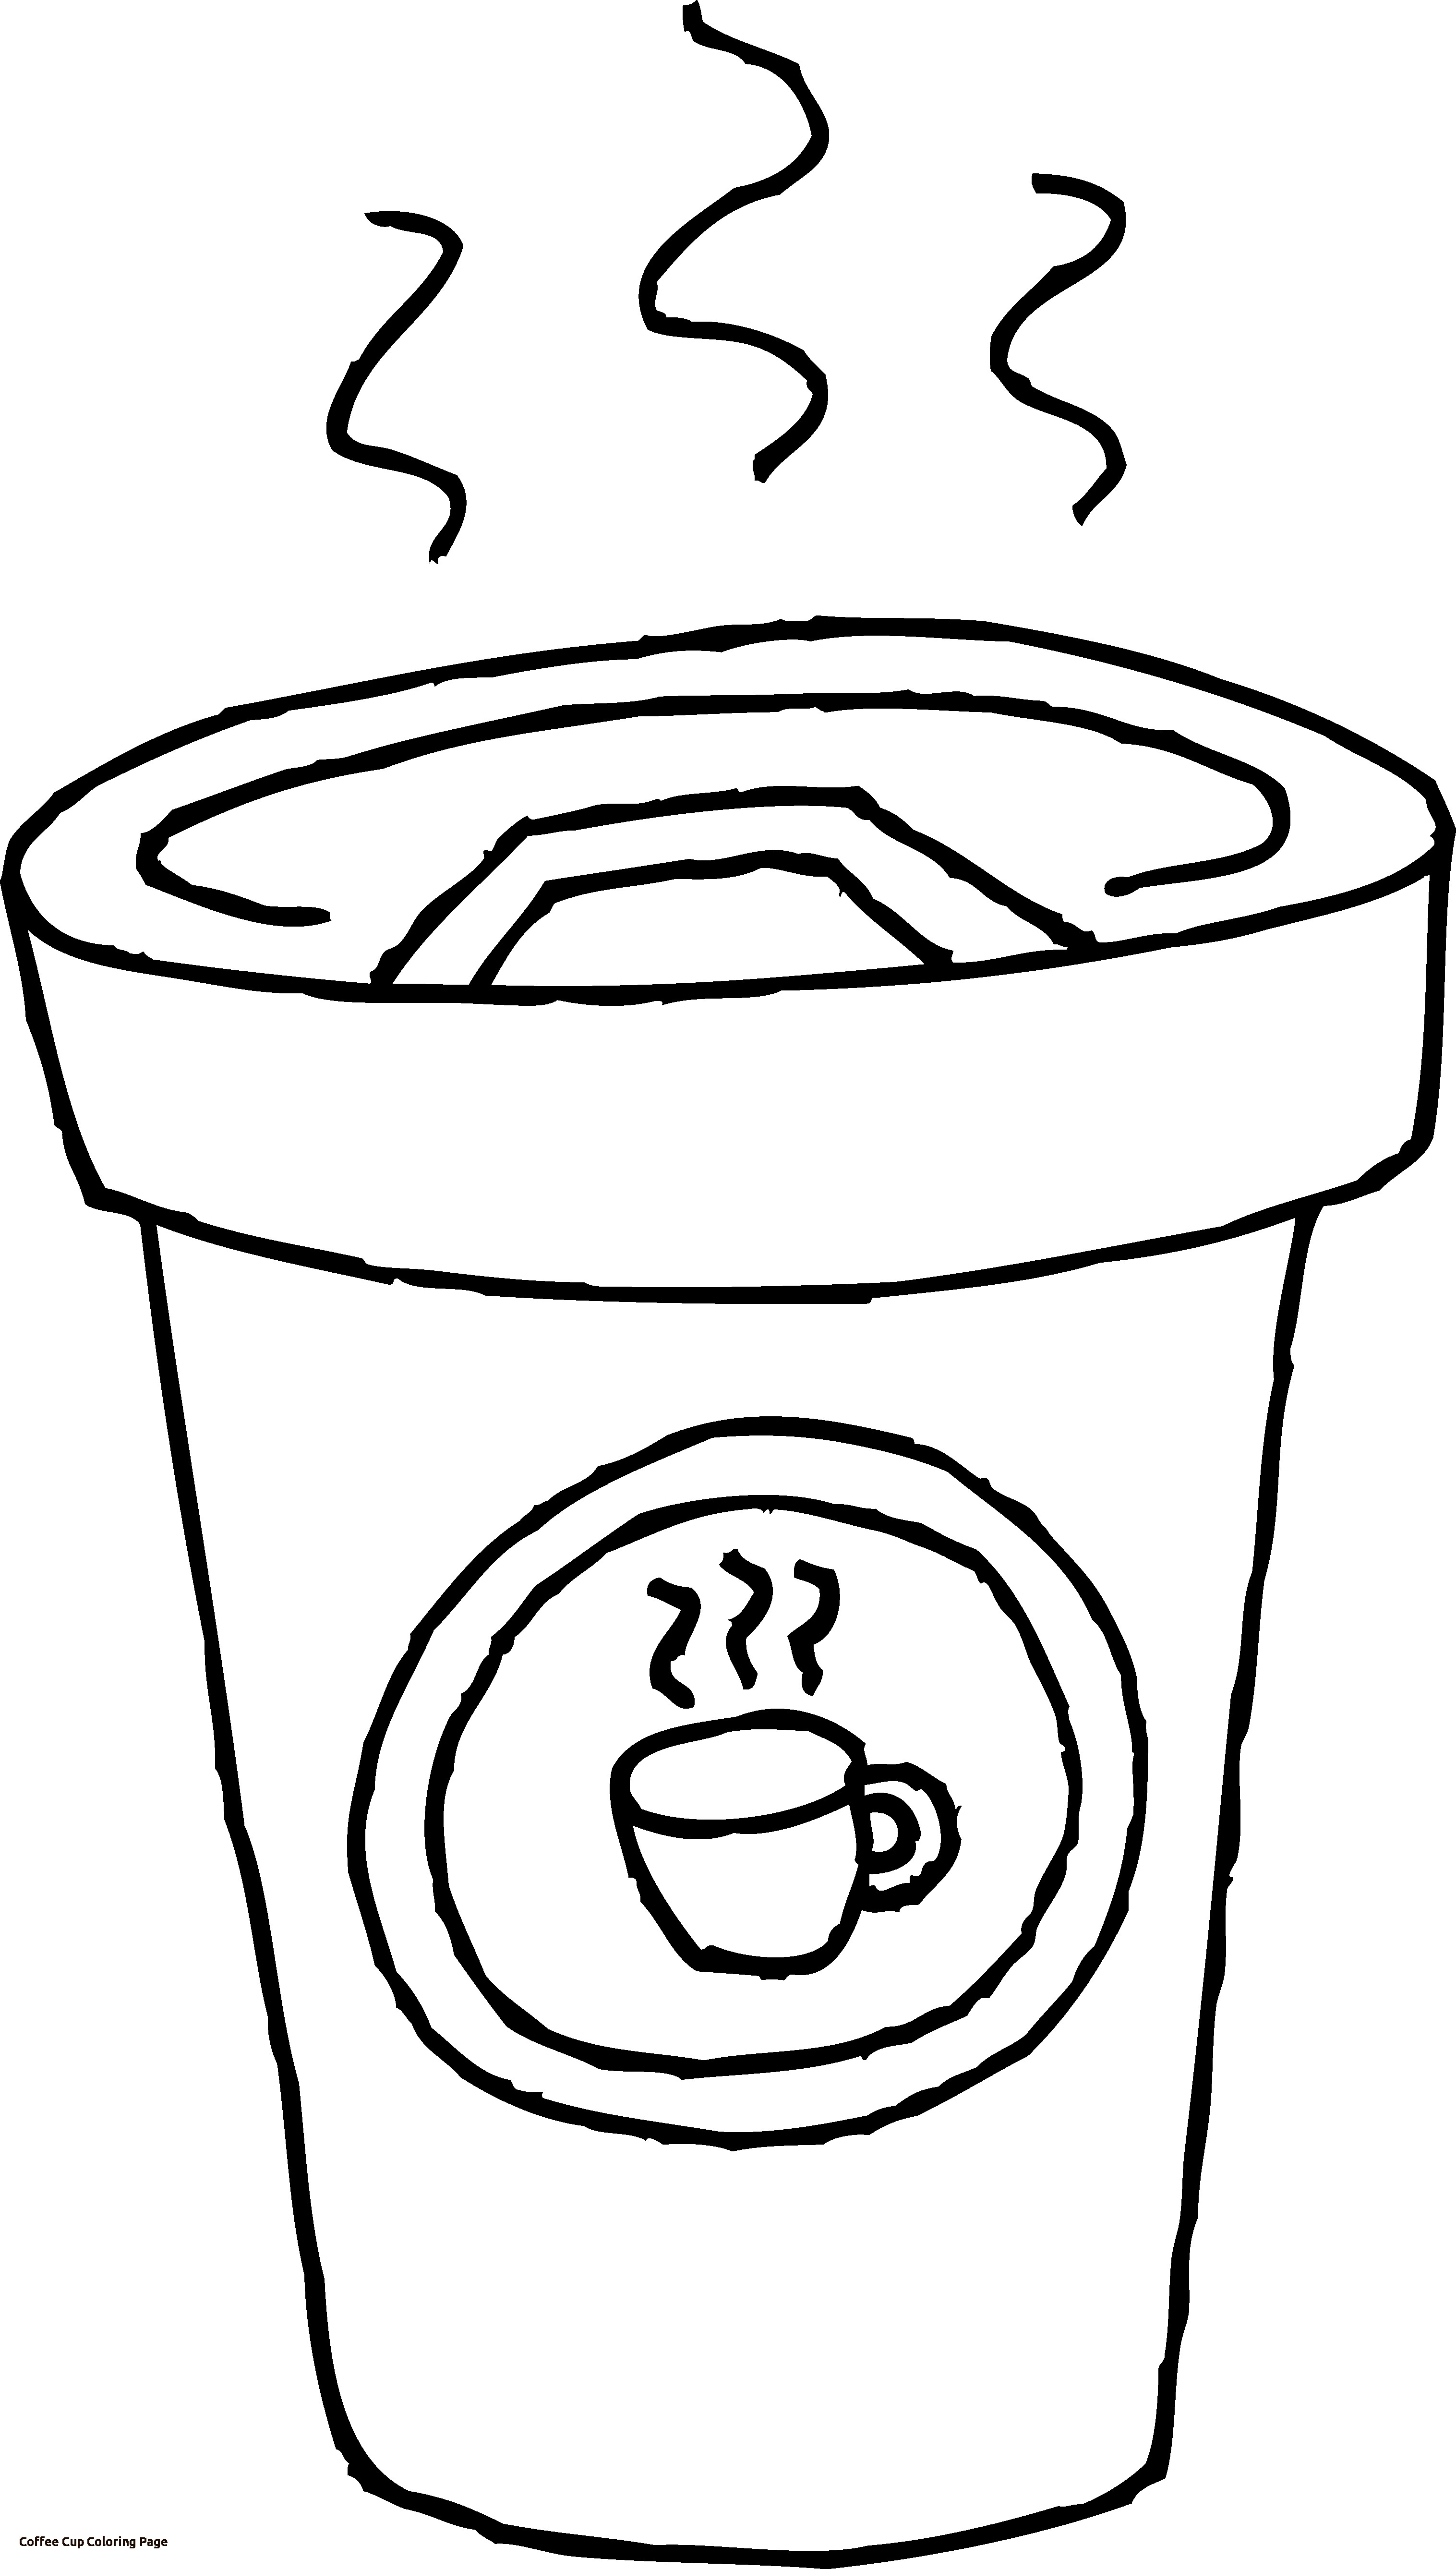 Coffee Cup Coloring Pages at Free printable